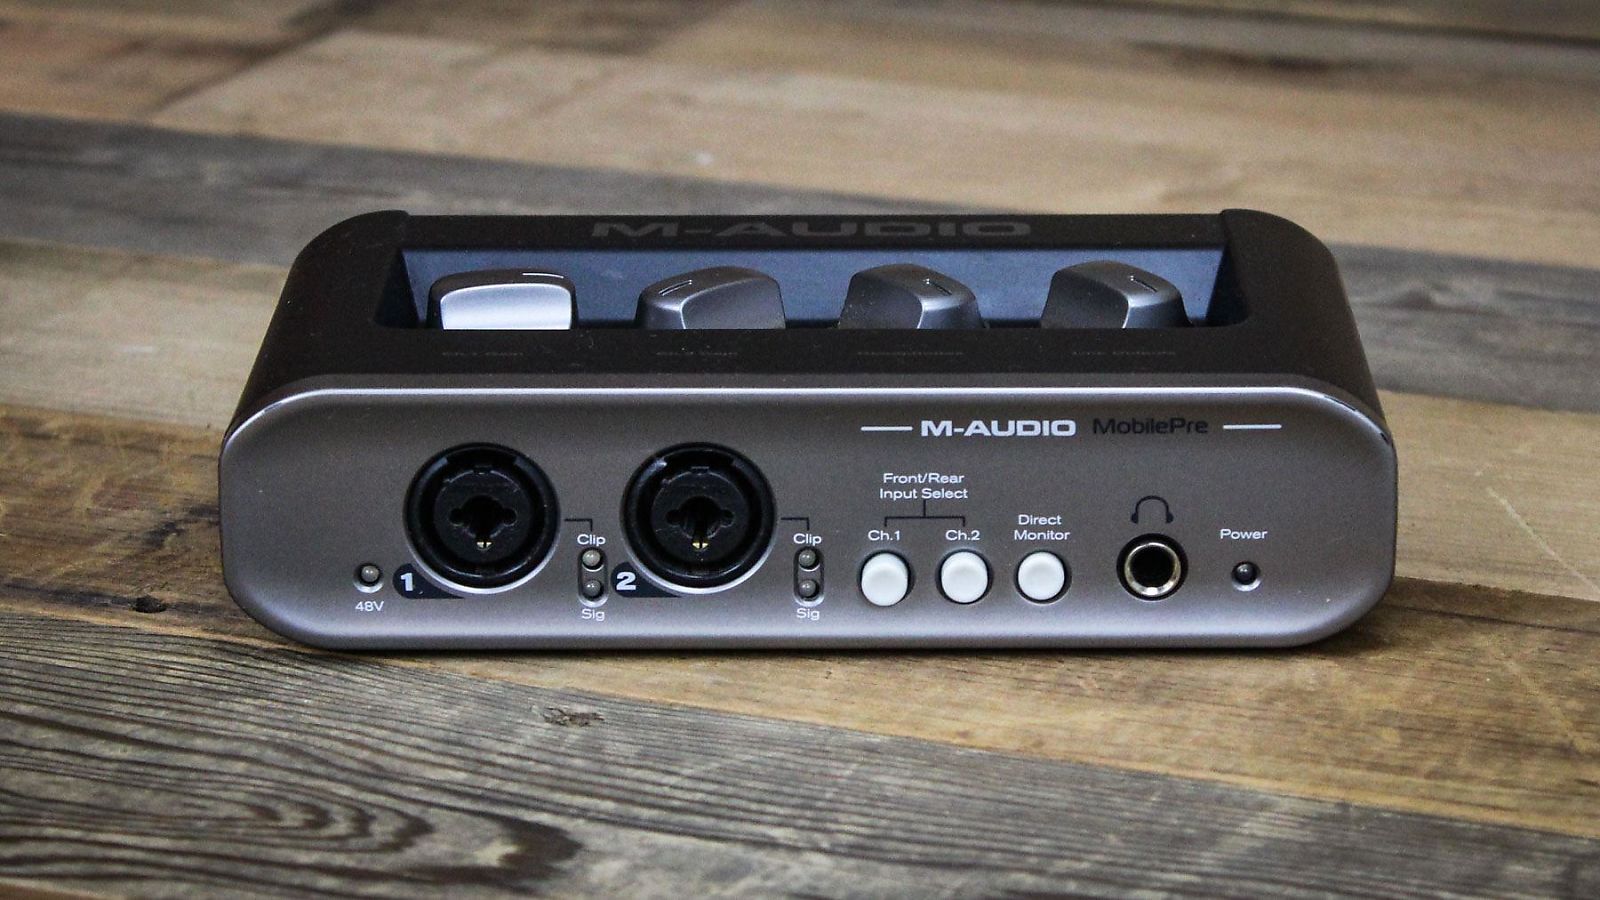 How To Setup Mobile Pre Audio Interface